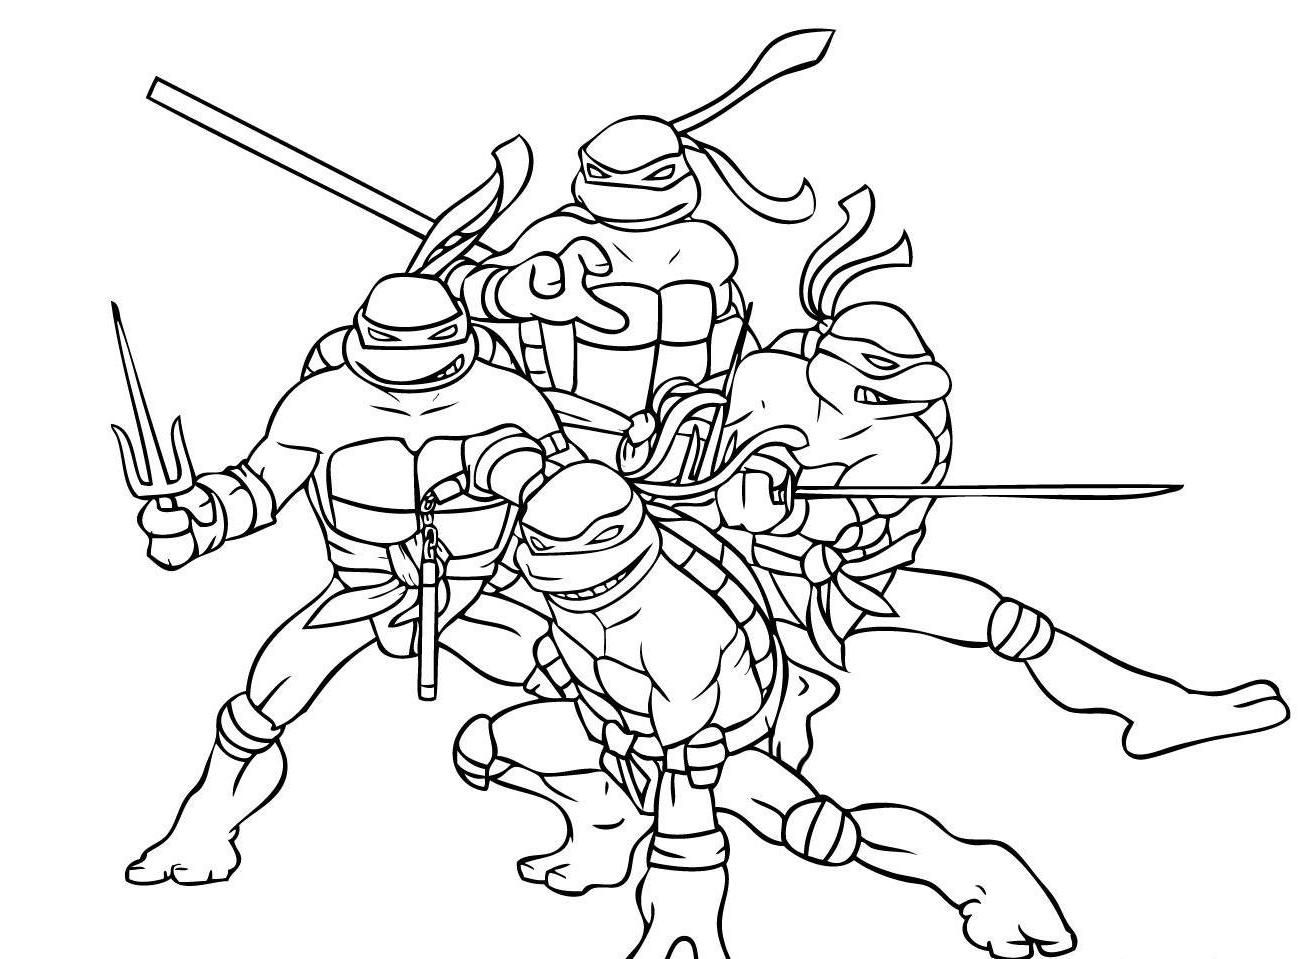 Turtle Ninja - Coloring Pages for Kids and for Adults